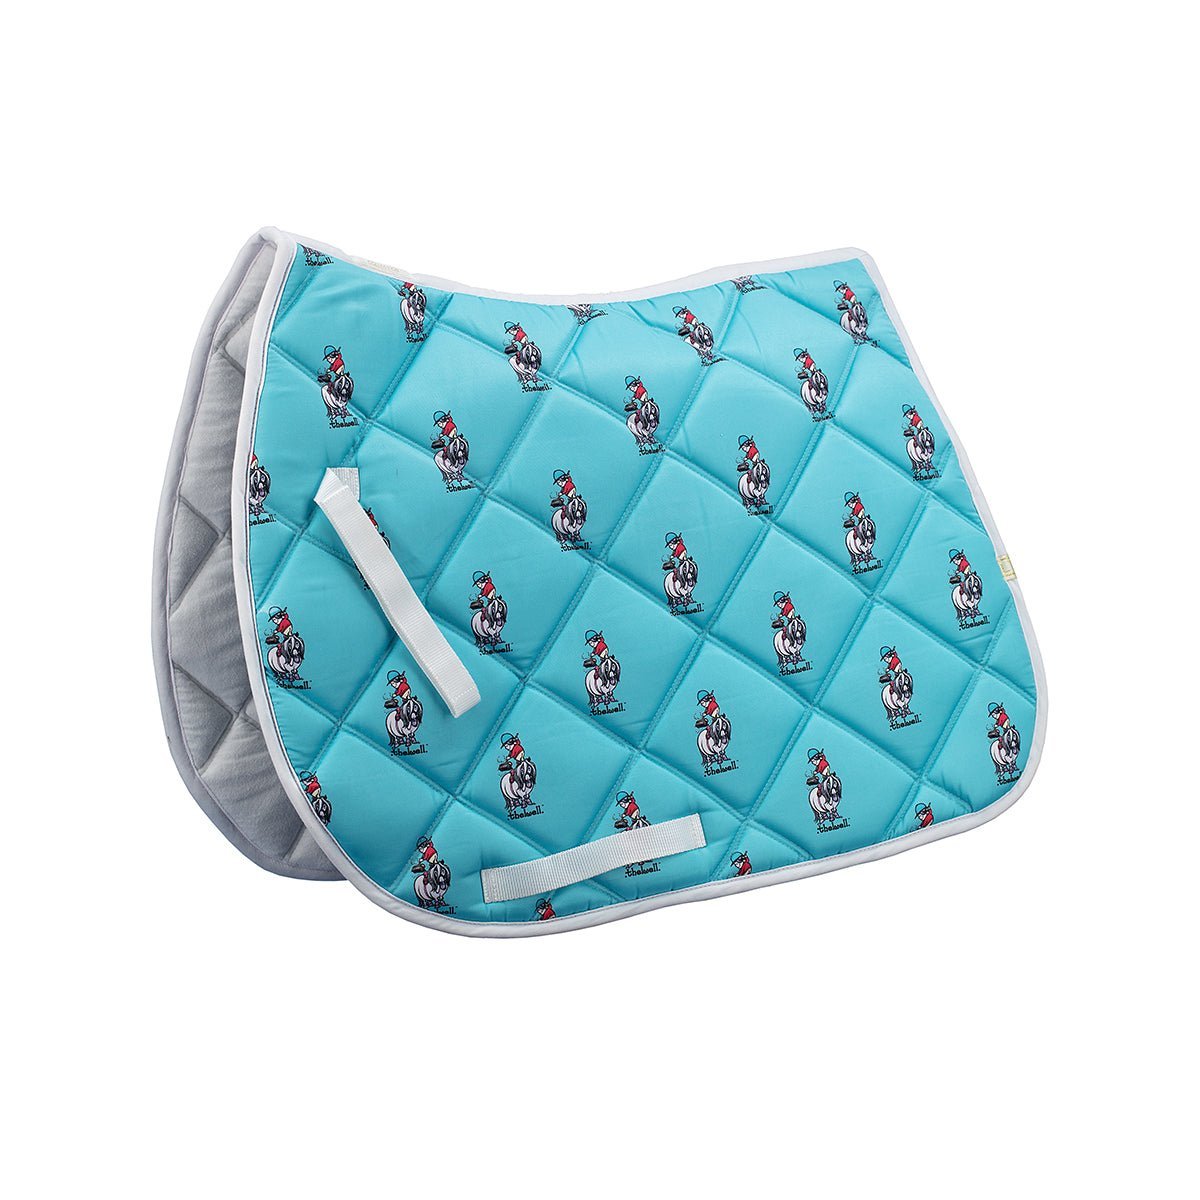 Weaver Leather All Purpose Contoured Saddle Pad - Teal/Green